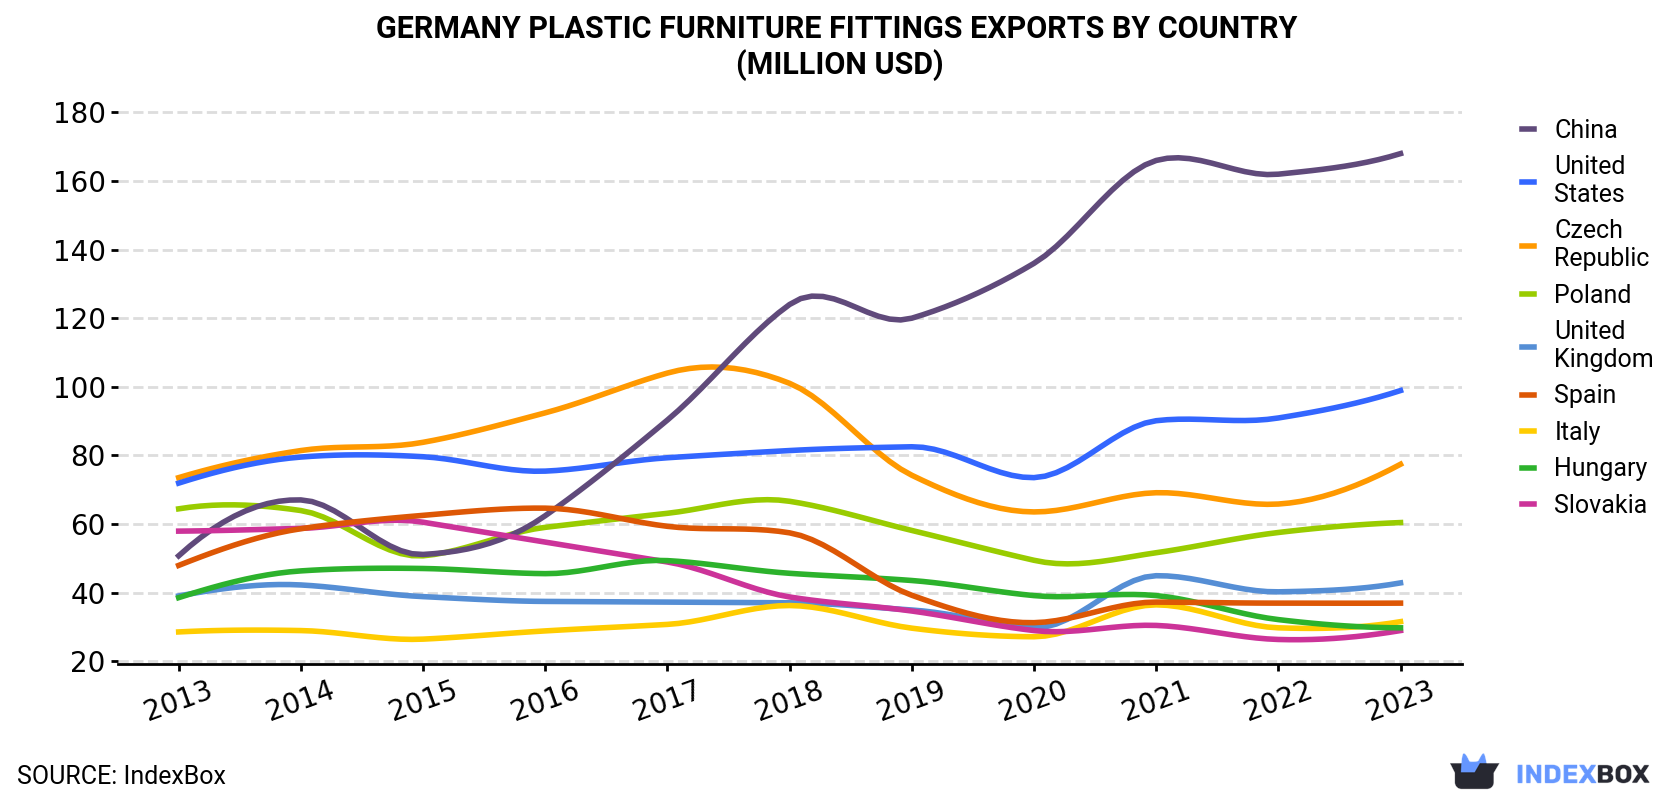 Germany Plastic Furniture Fittings Exports By Country (Million USD)